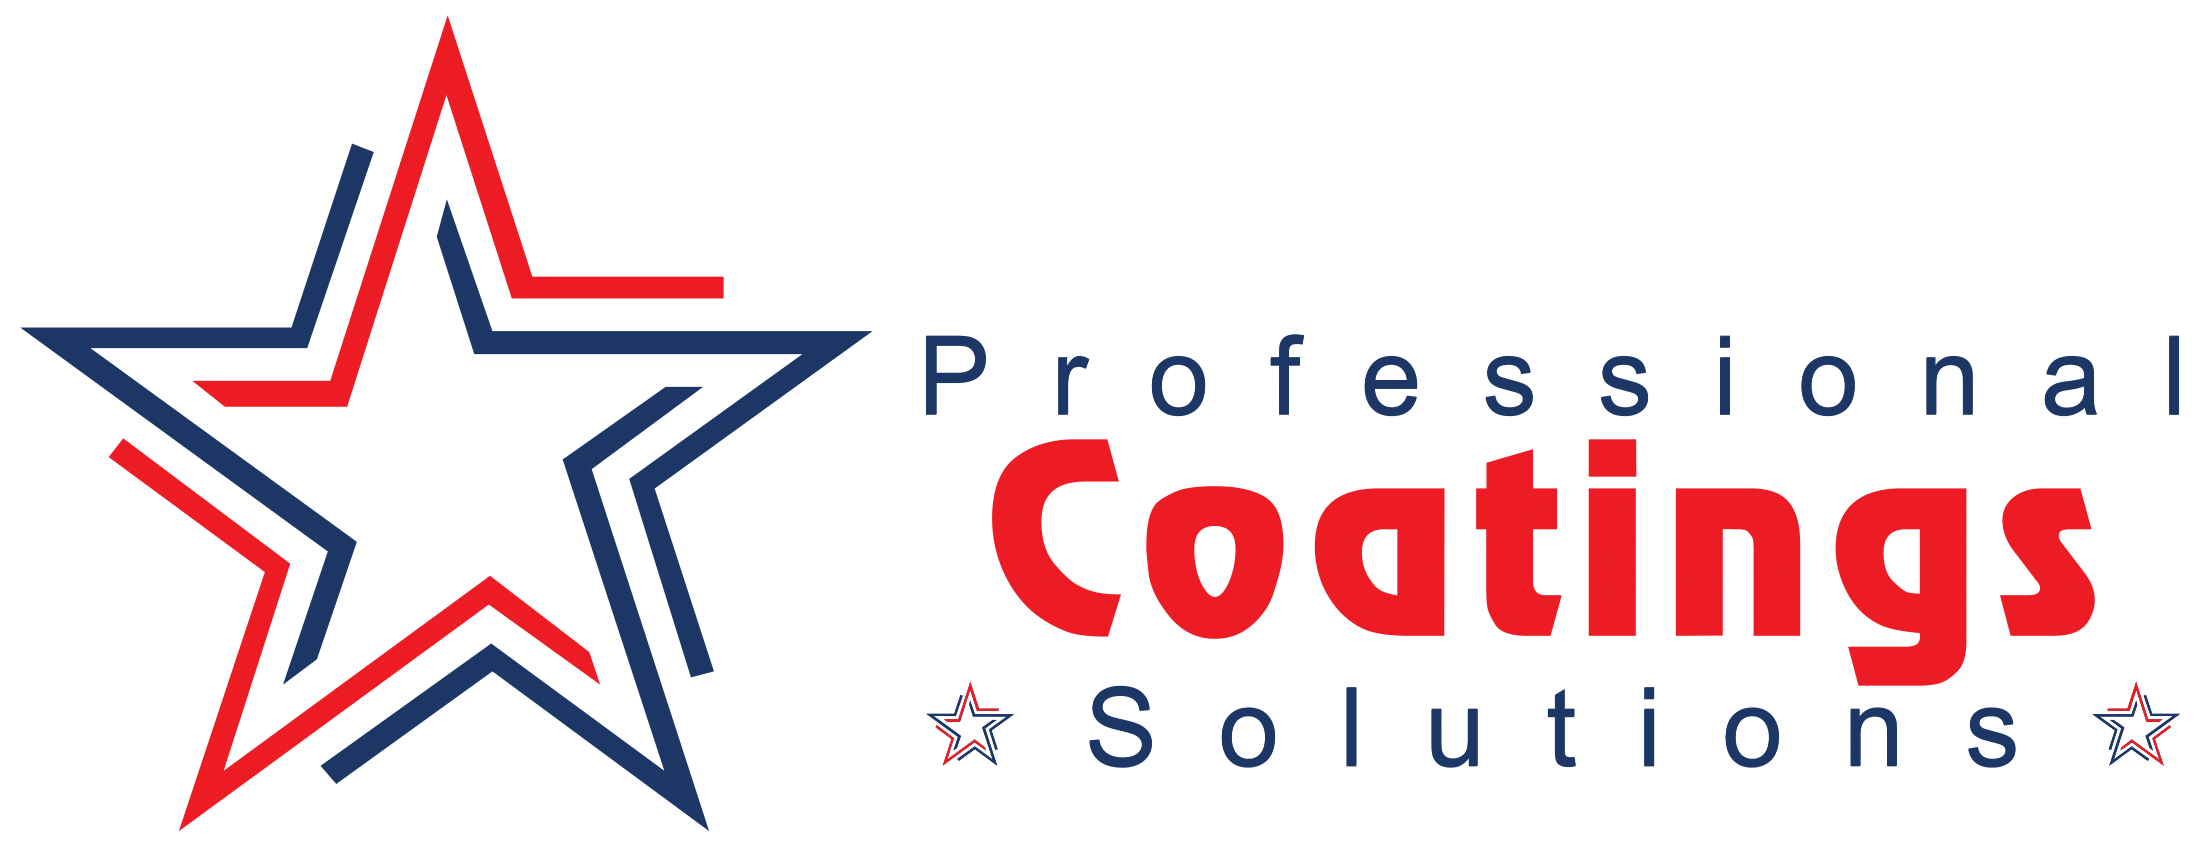 Professional Coatings Solutions